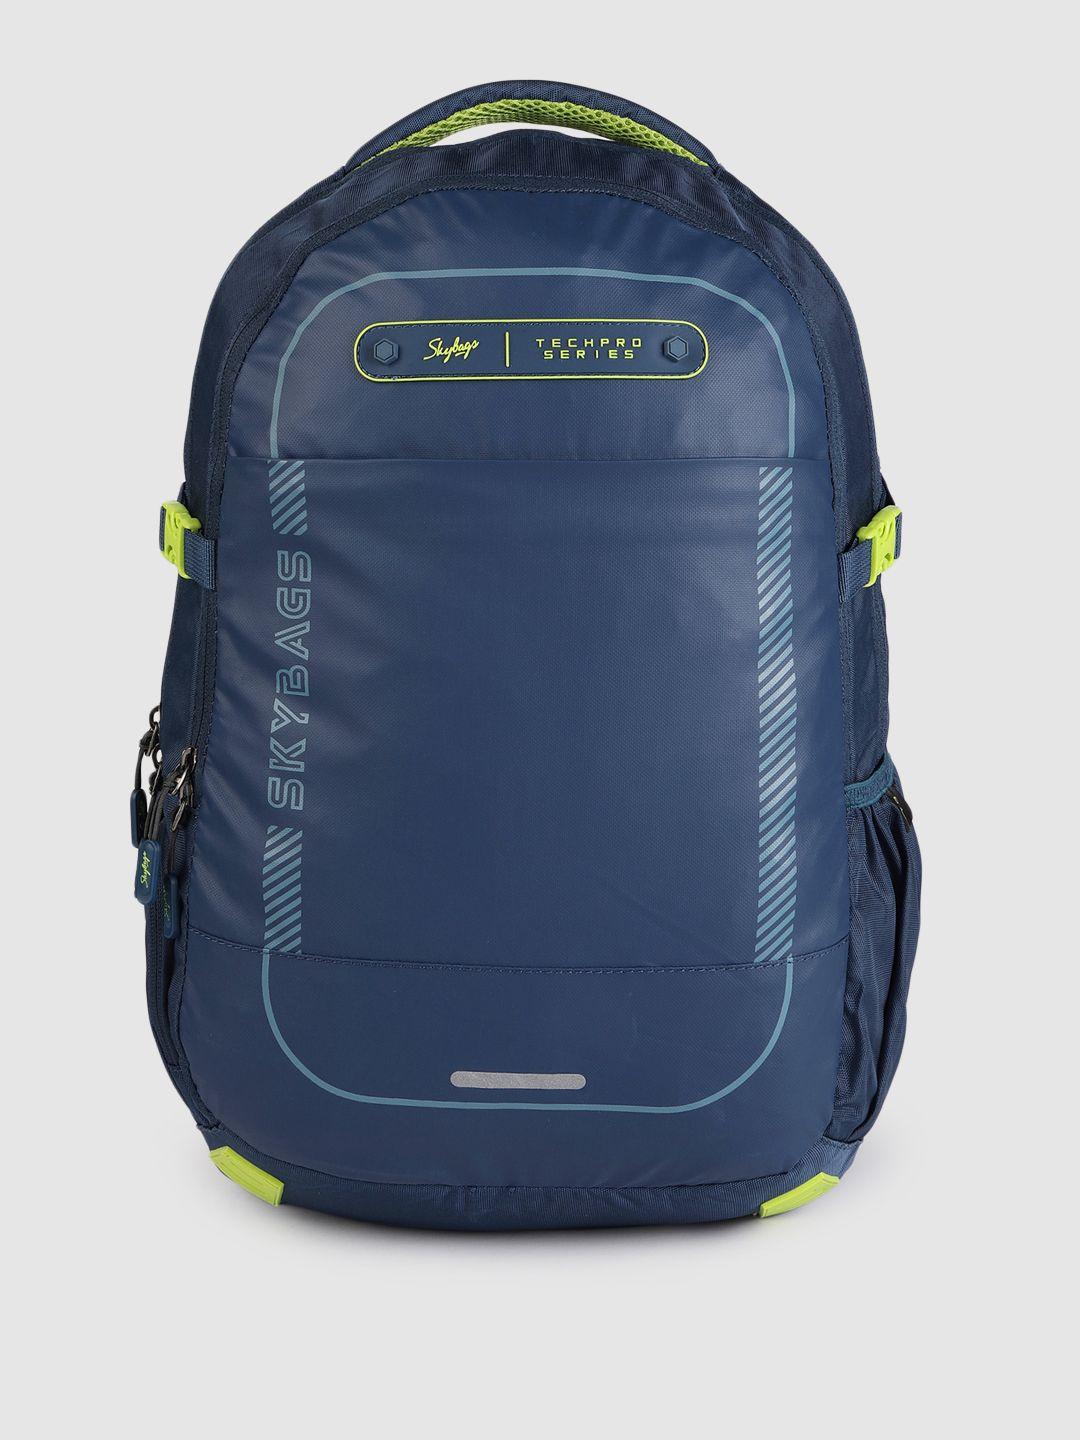 skybags blue brand logo backpack with compression straps